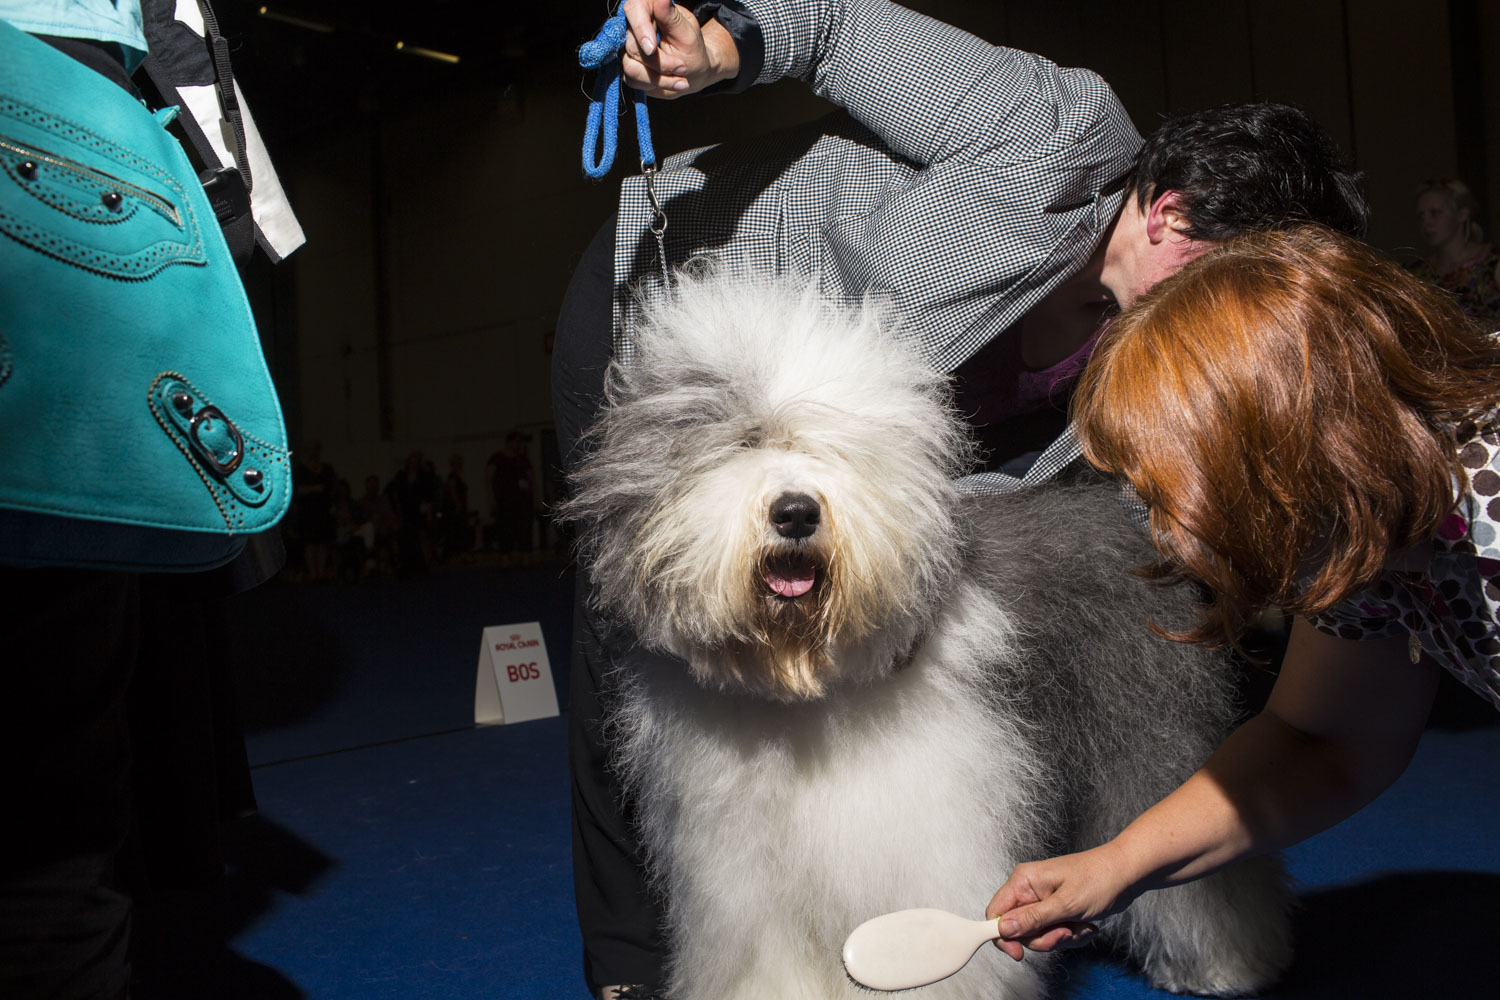 HELSINKI, FINLAND - AUG 10: Nancy, a 3 year old female Old English Sheepdog is prepped for the official winning photo by her handler Elisabeth Antl, top, from Austria, and an assistant, after winning Best of Breed during the 2014 World Dog Show on Sunday, August 10th, 2014, in Helsinki, Finland. (Photo by Landon Nordeman)